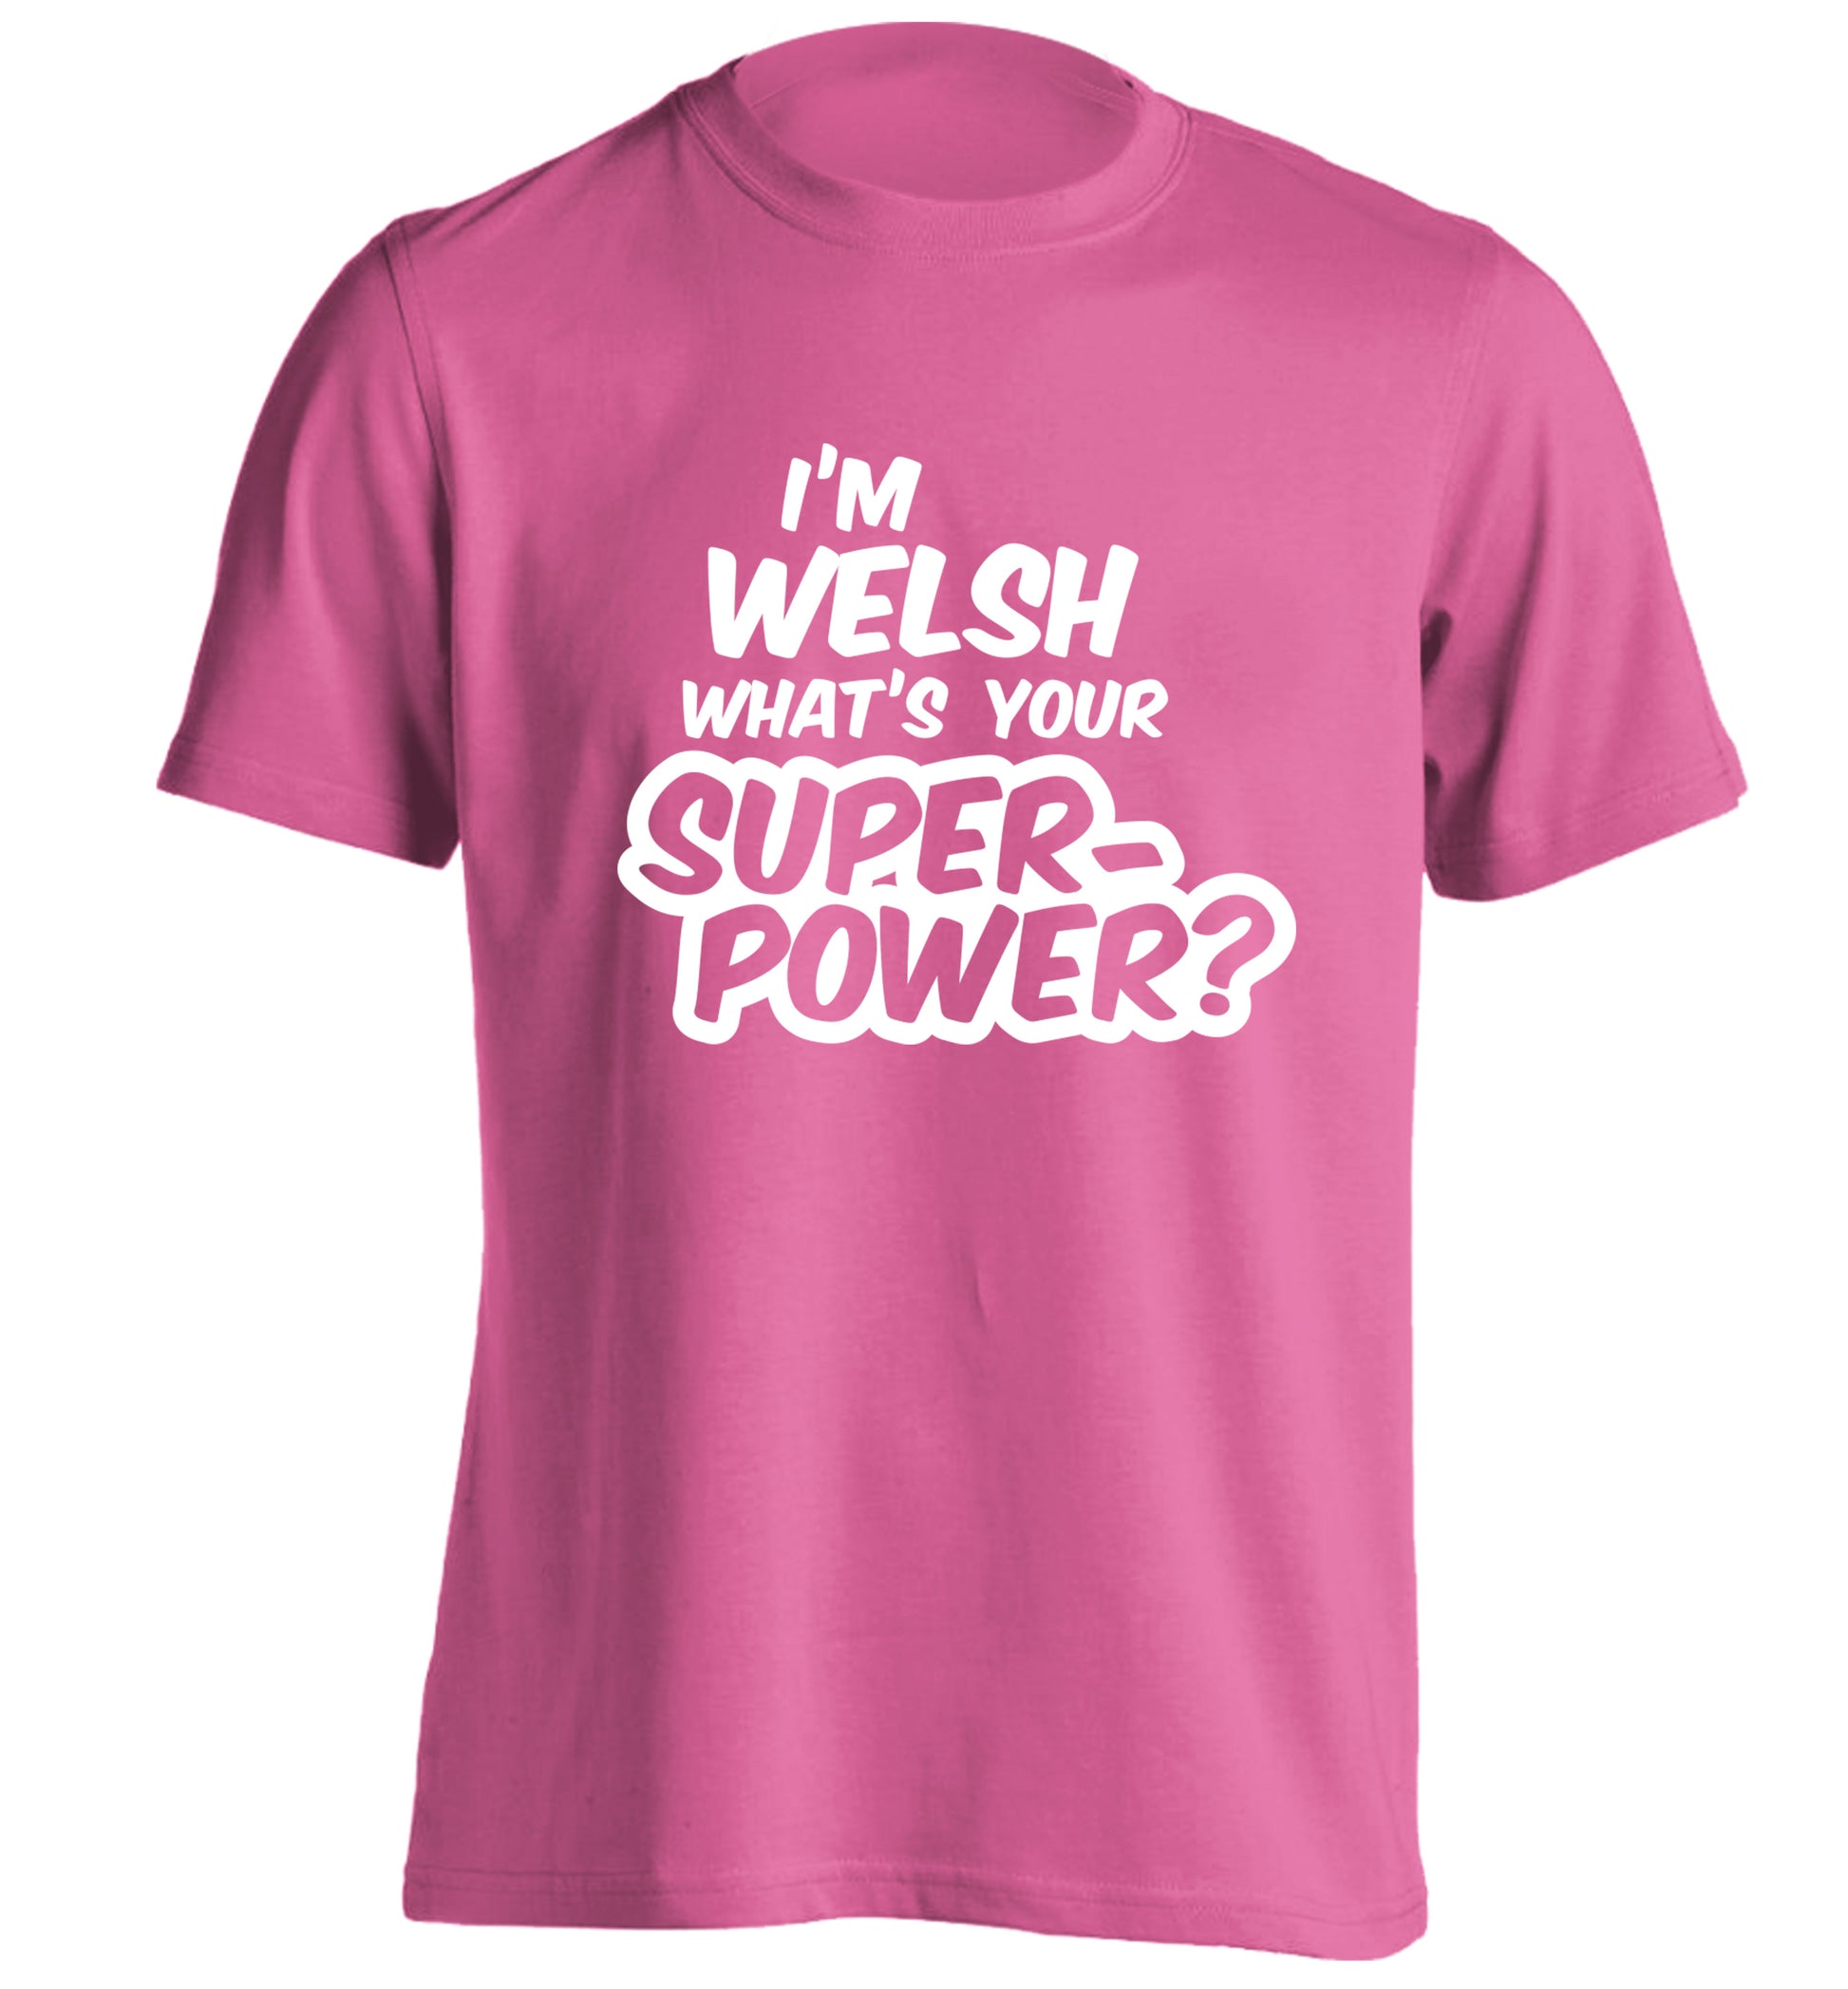 I'm Welsh what's your superpower? adults unisex pink Tshirt 2XL